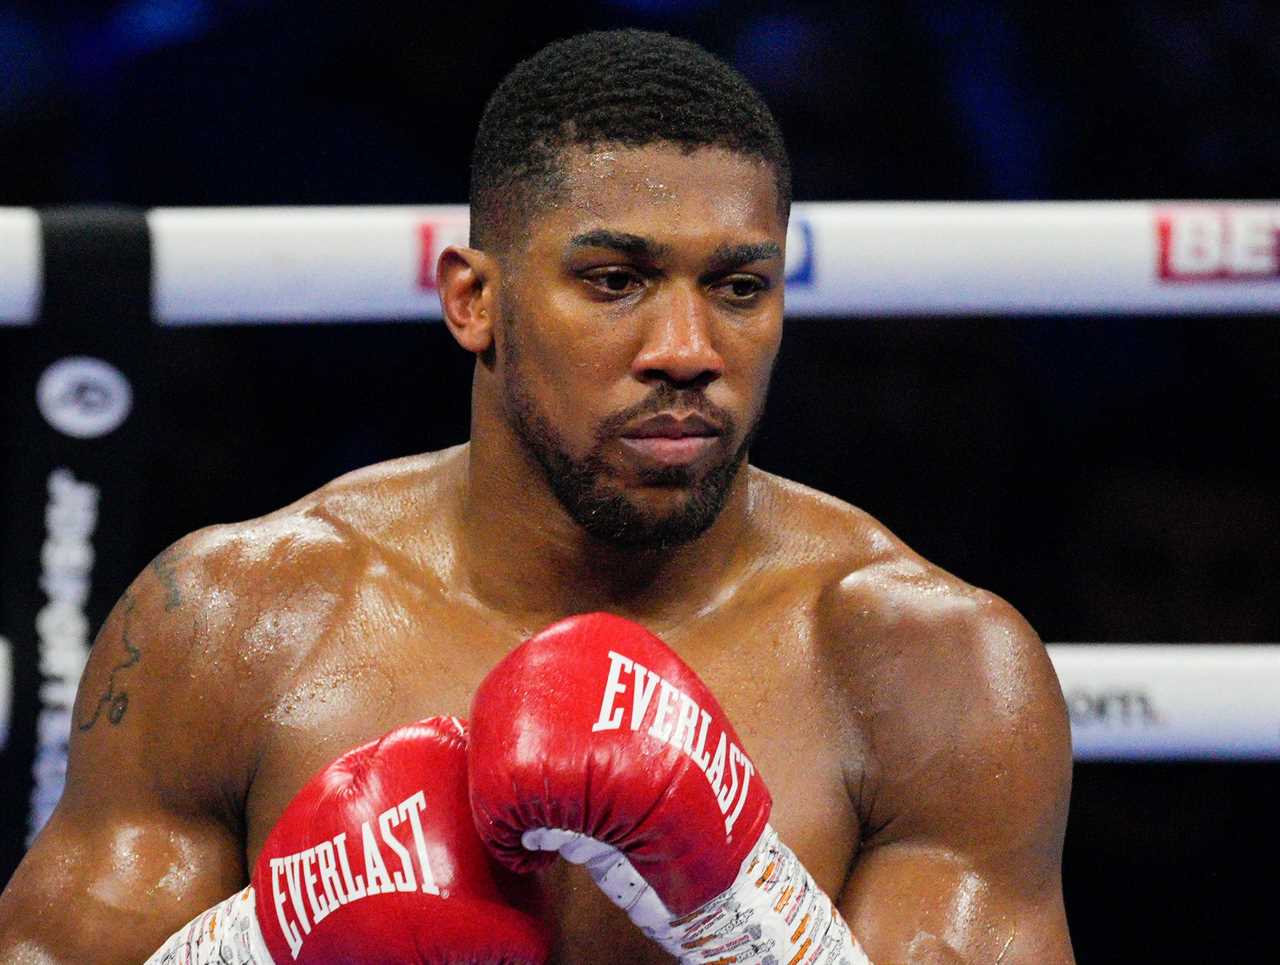 Anthony Joshua is called out as a'sleepy man' by an unbeaten heavyweight opponent and told he'll be 'destroyed.'